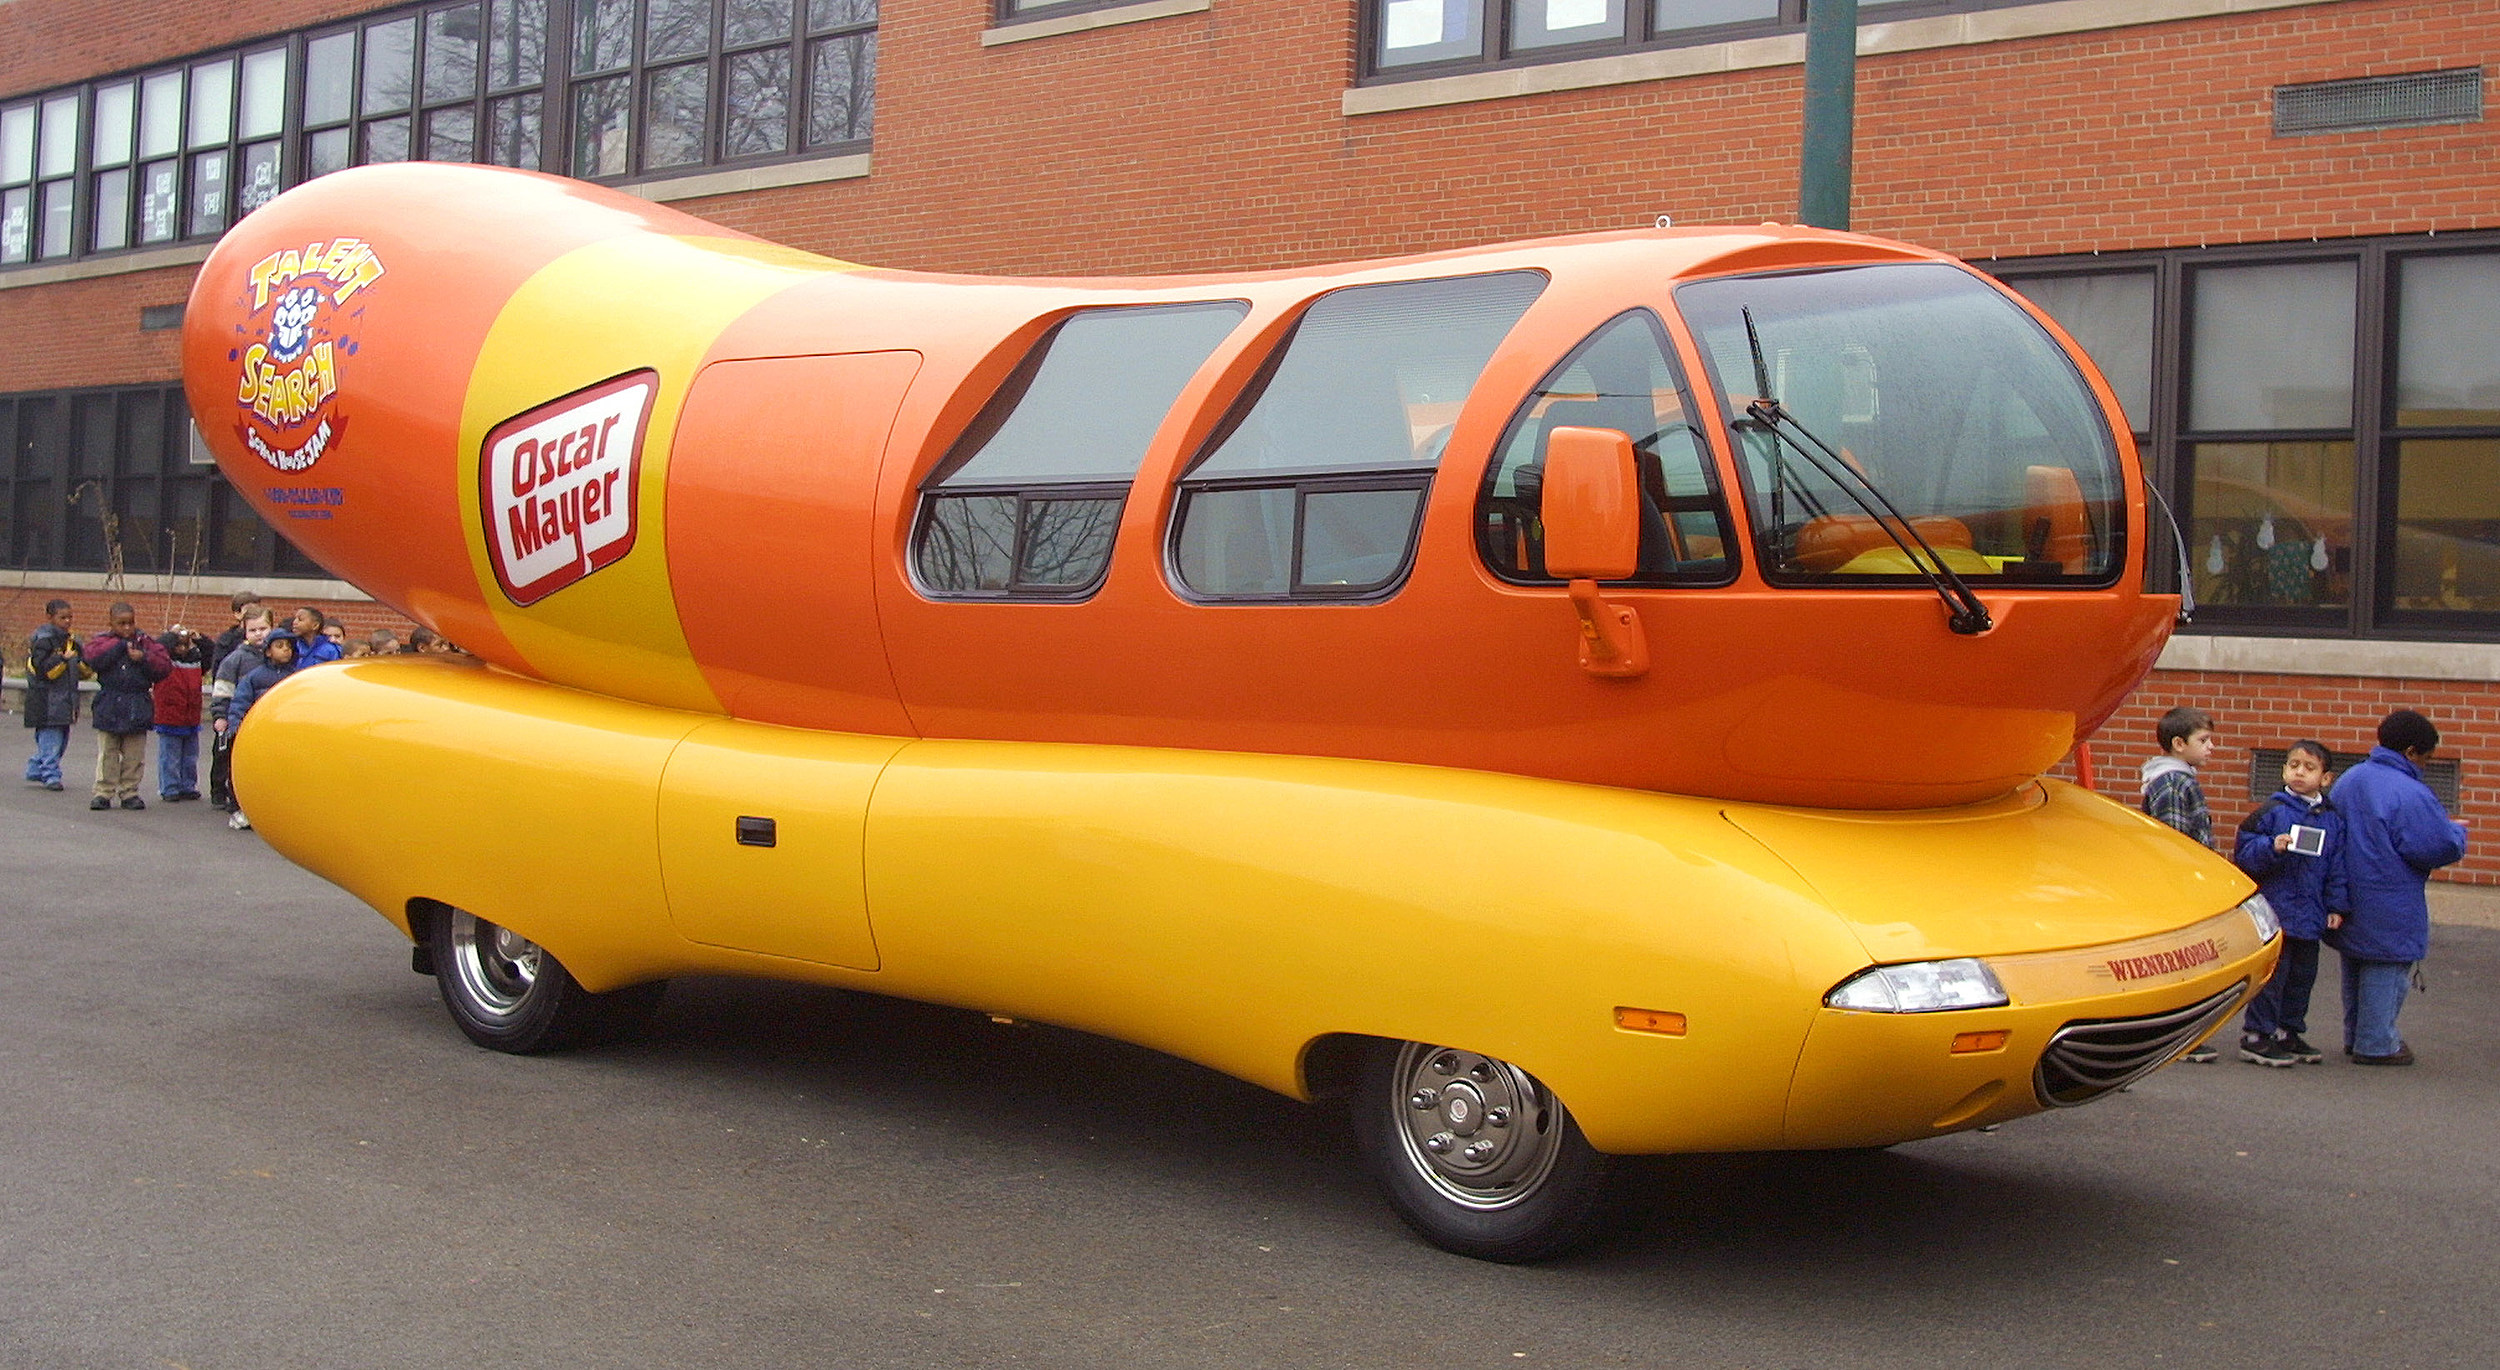 How much is Oscar Mayer Wienermobile worth?